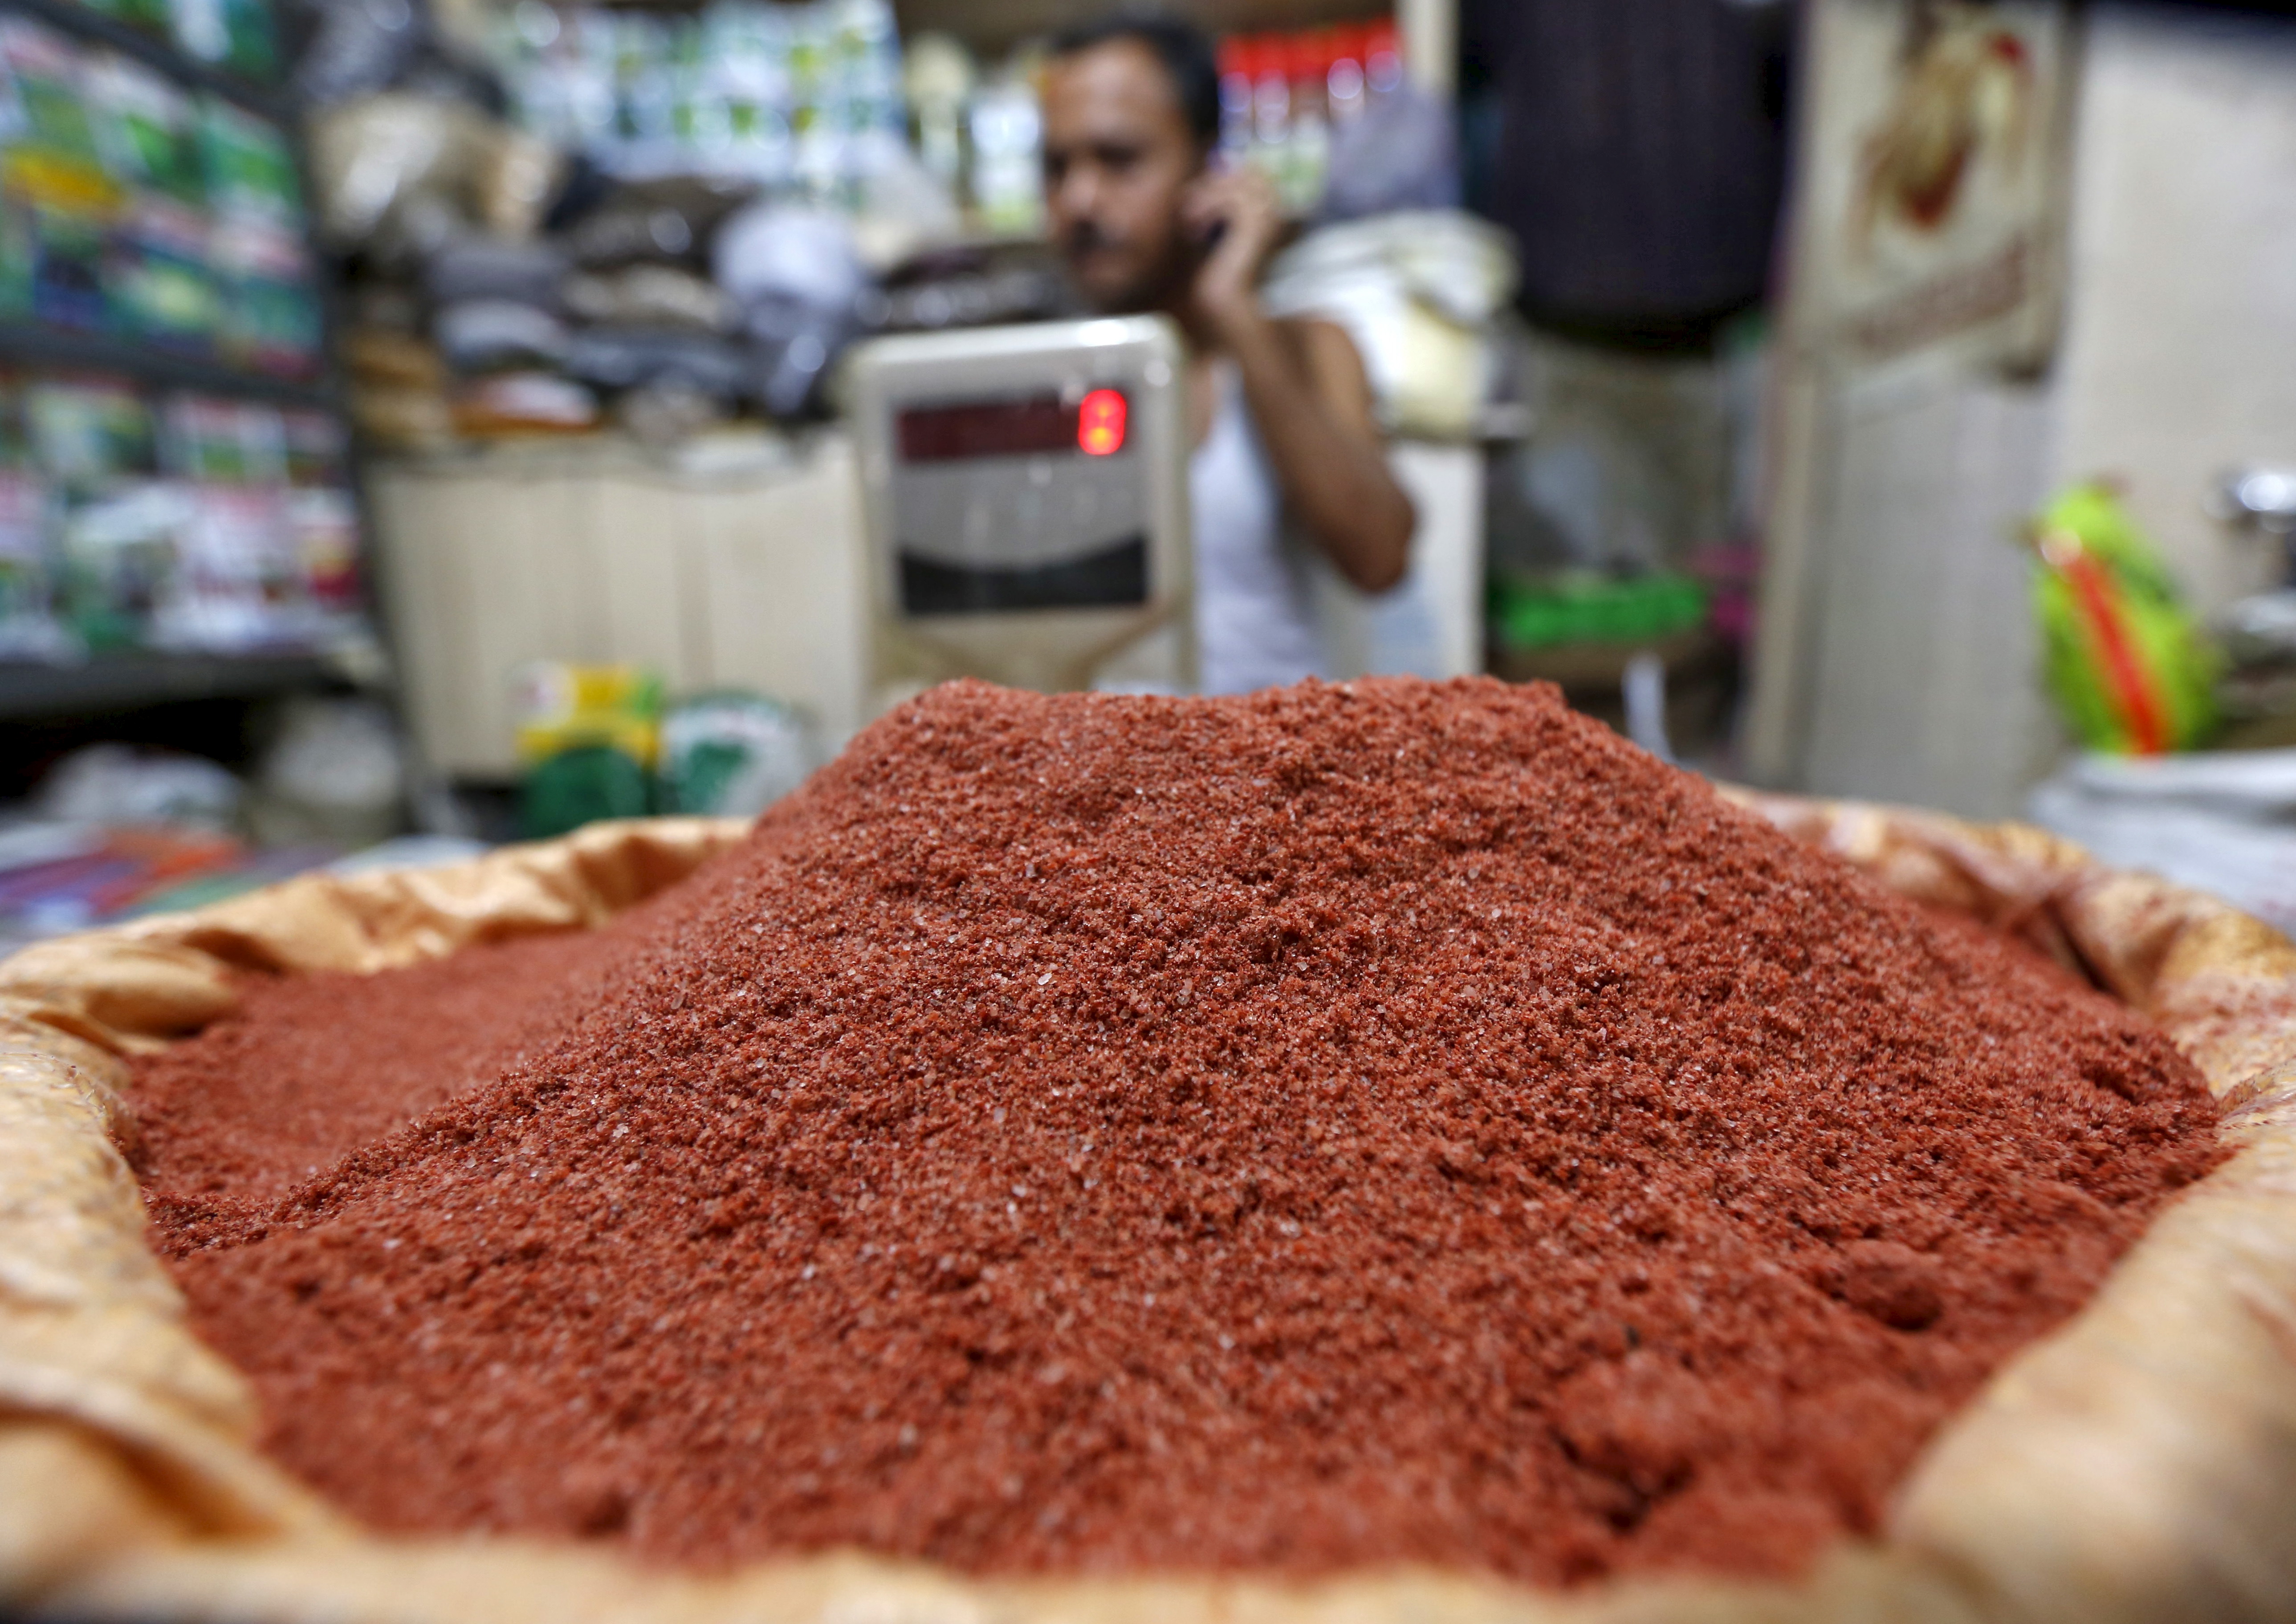 A shopkeeper speaks on his mobile phone next to a sack filled with potash for sale in Kolkata